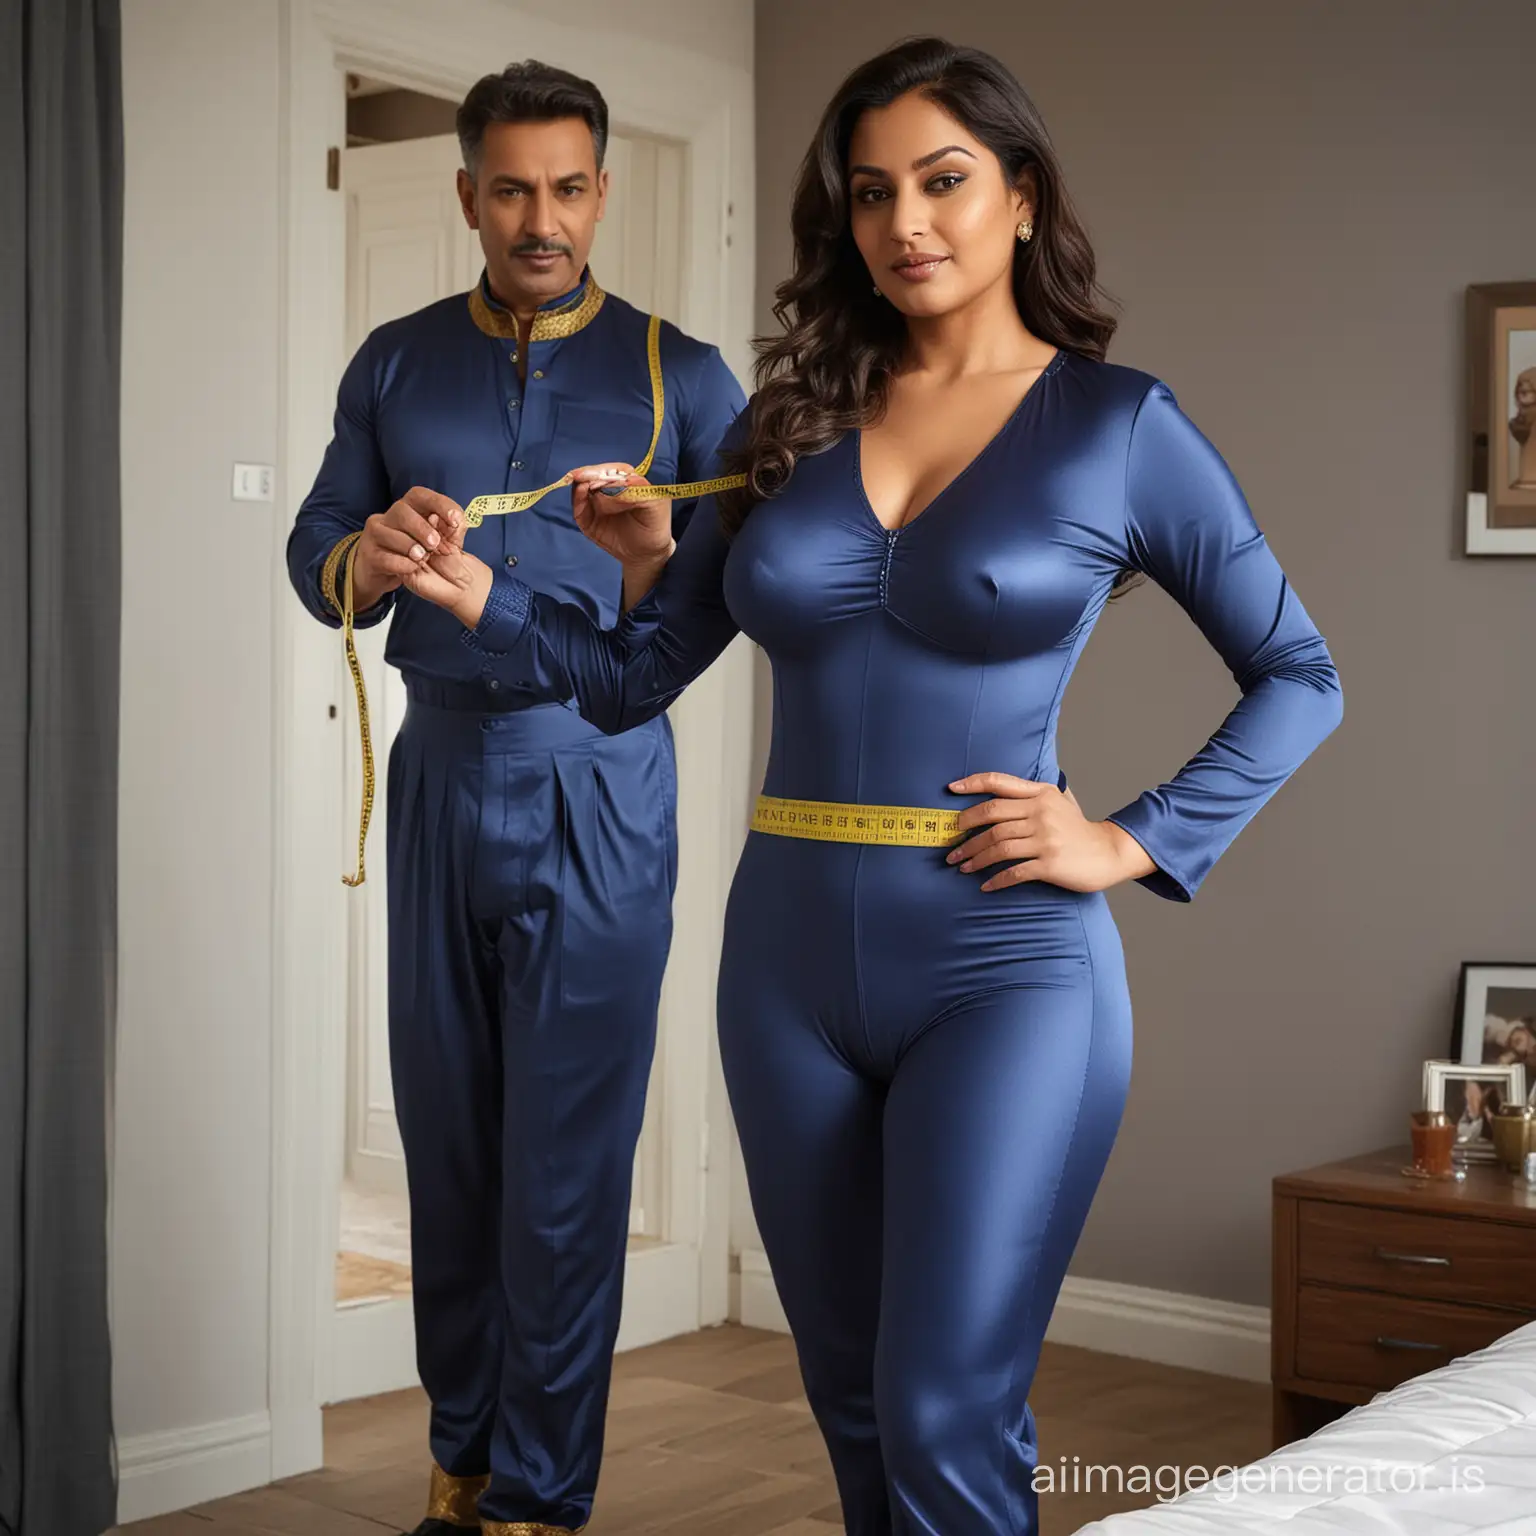 Experienced-Male-Tailor-Measures-Busty-Indian-Woman-in-Blue-Satin-Bodysuit